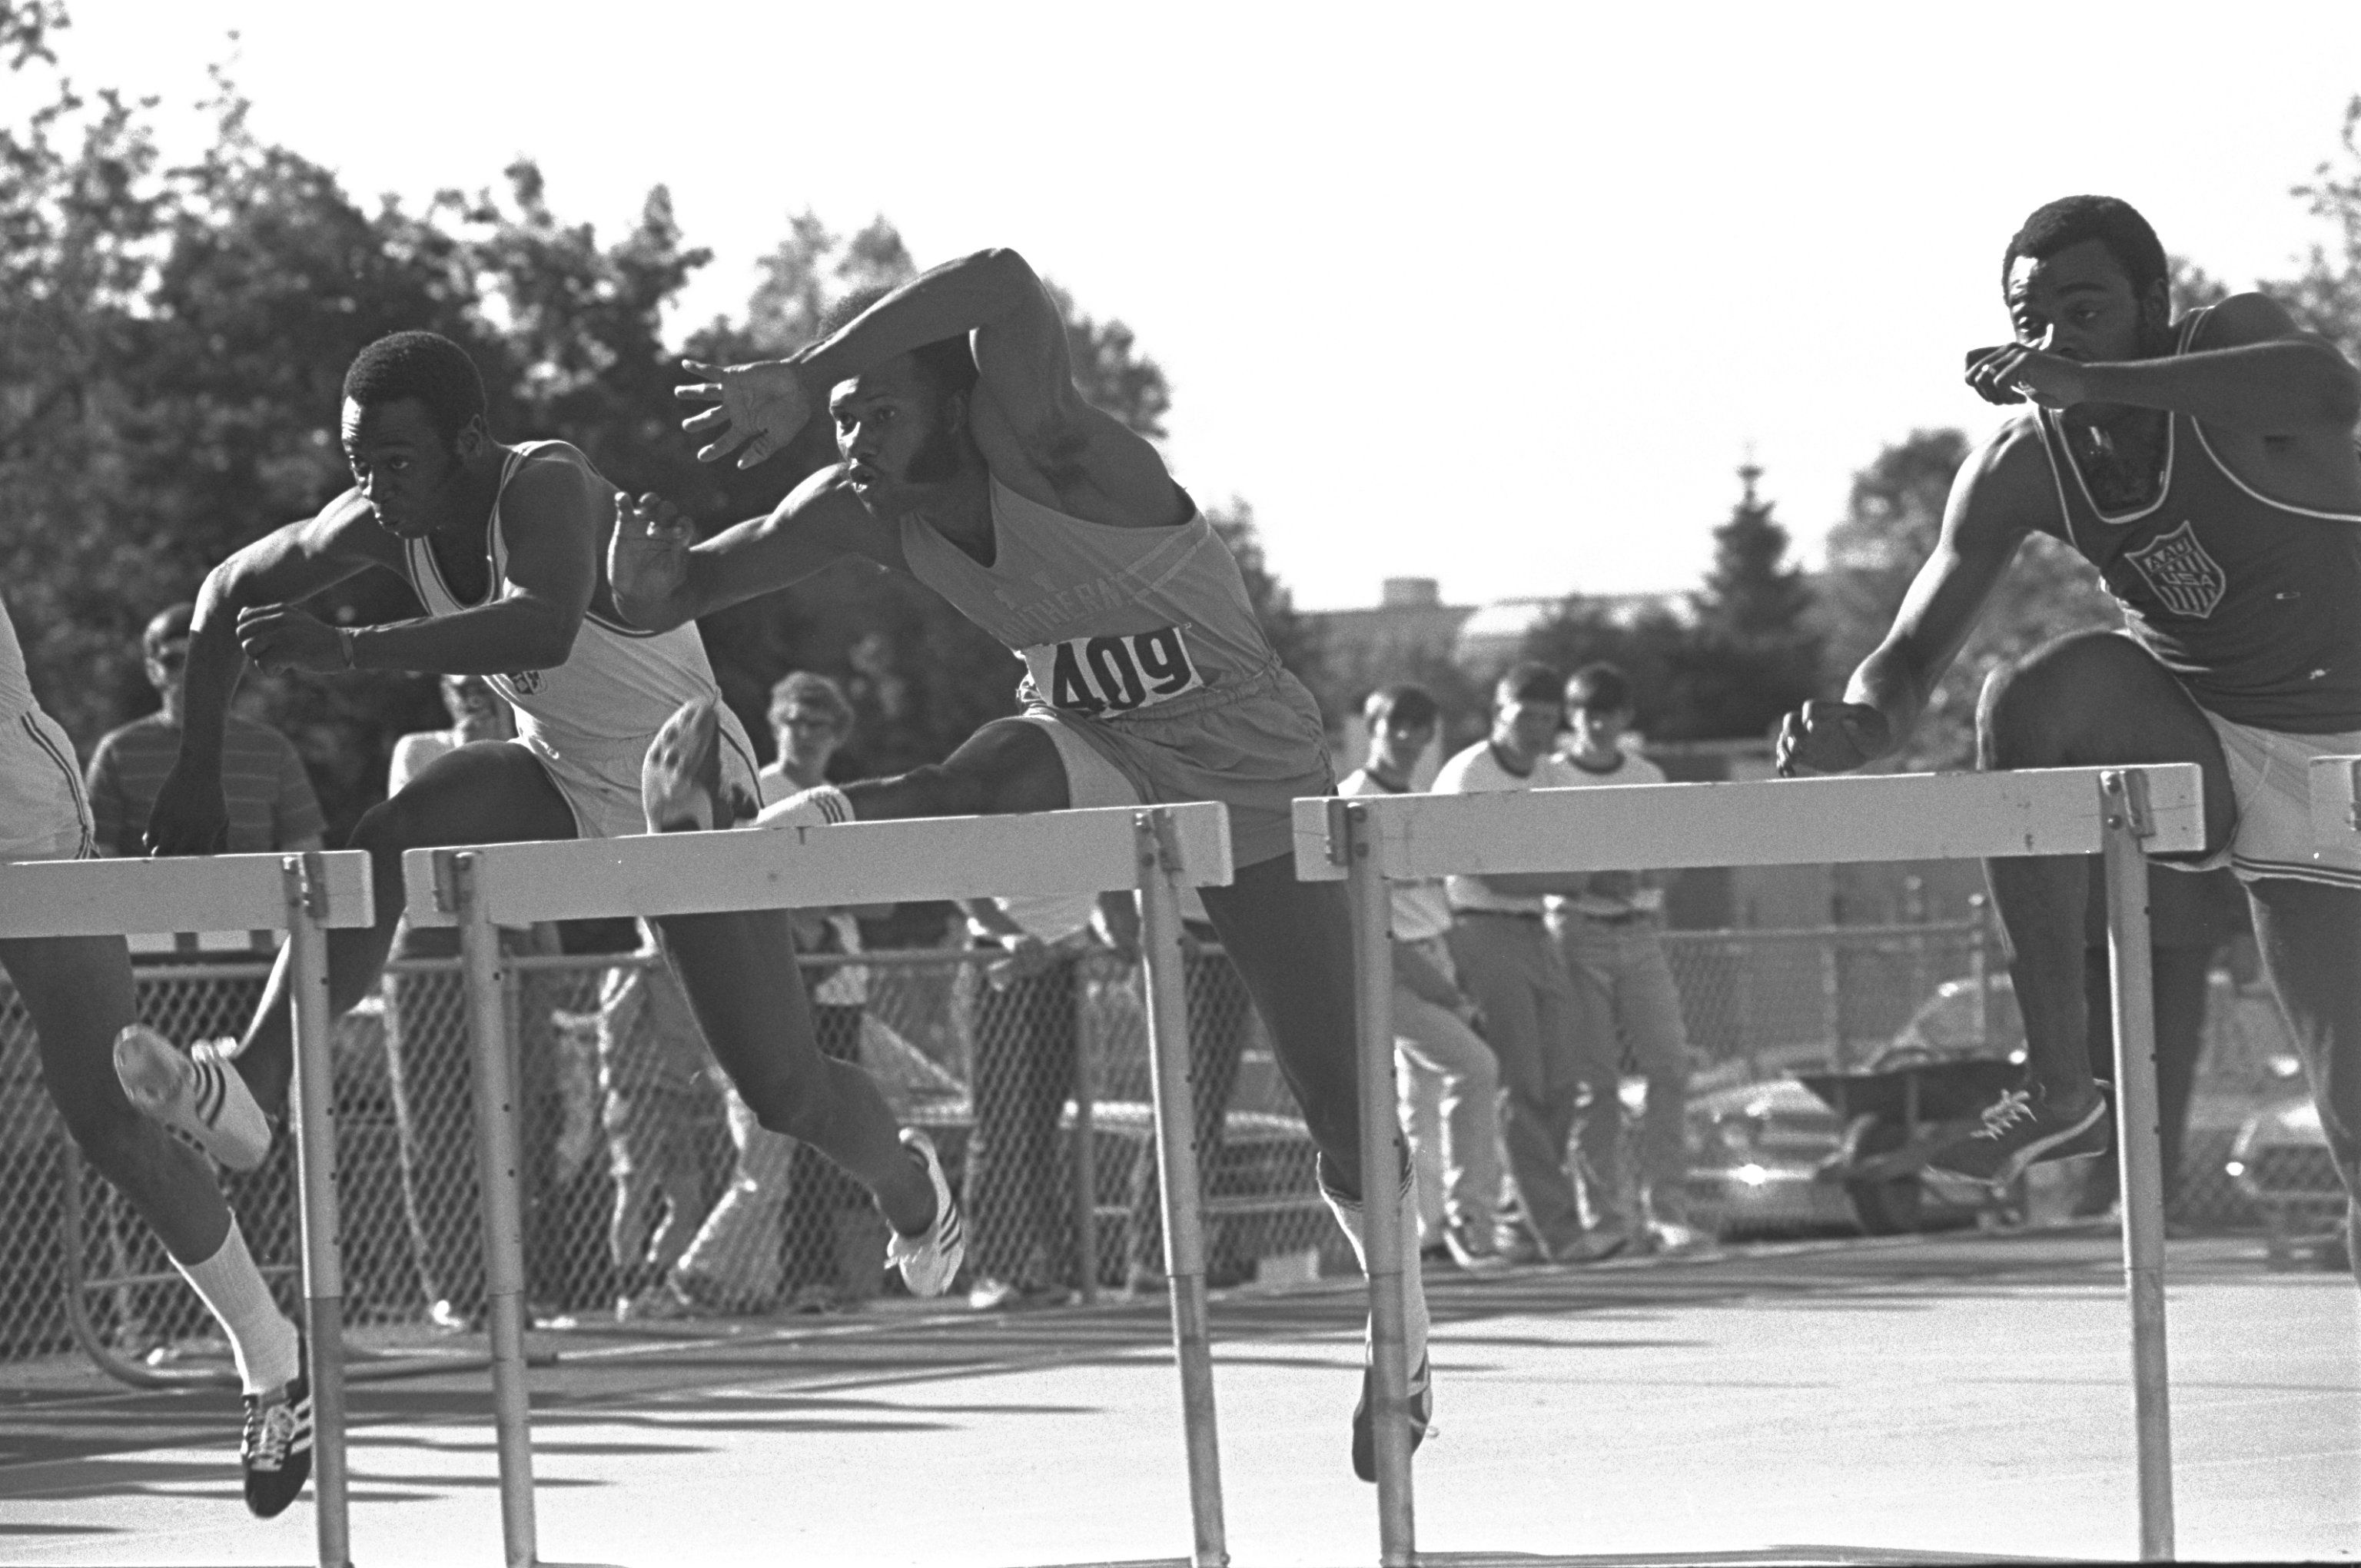 Rod Milburn (409) competes at the AAU Championships in Eugene